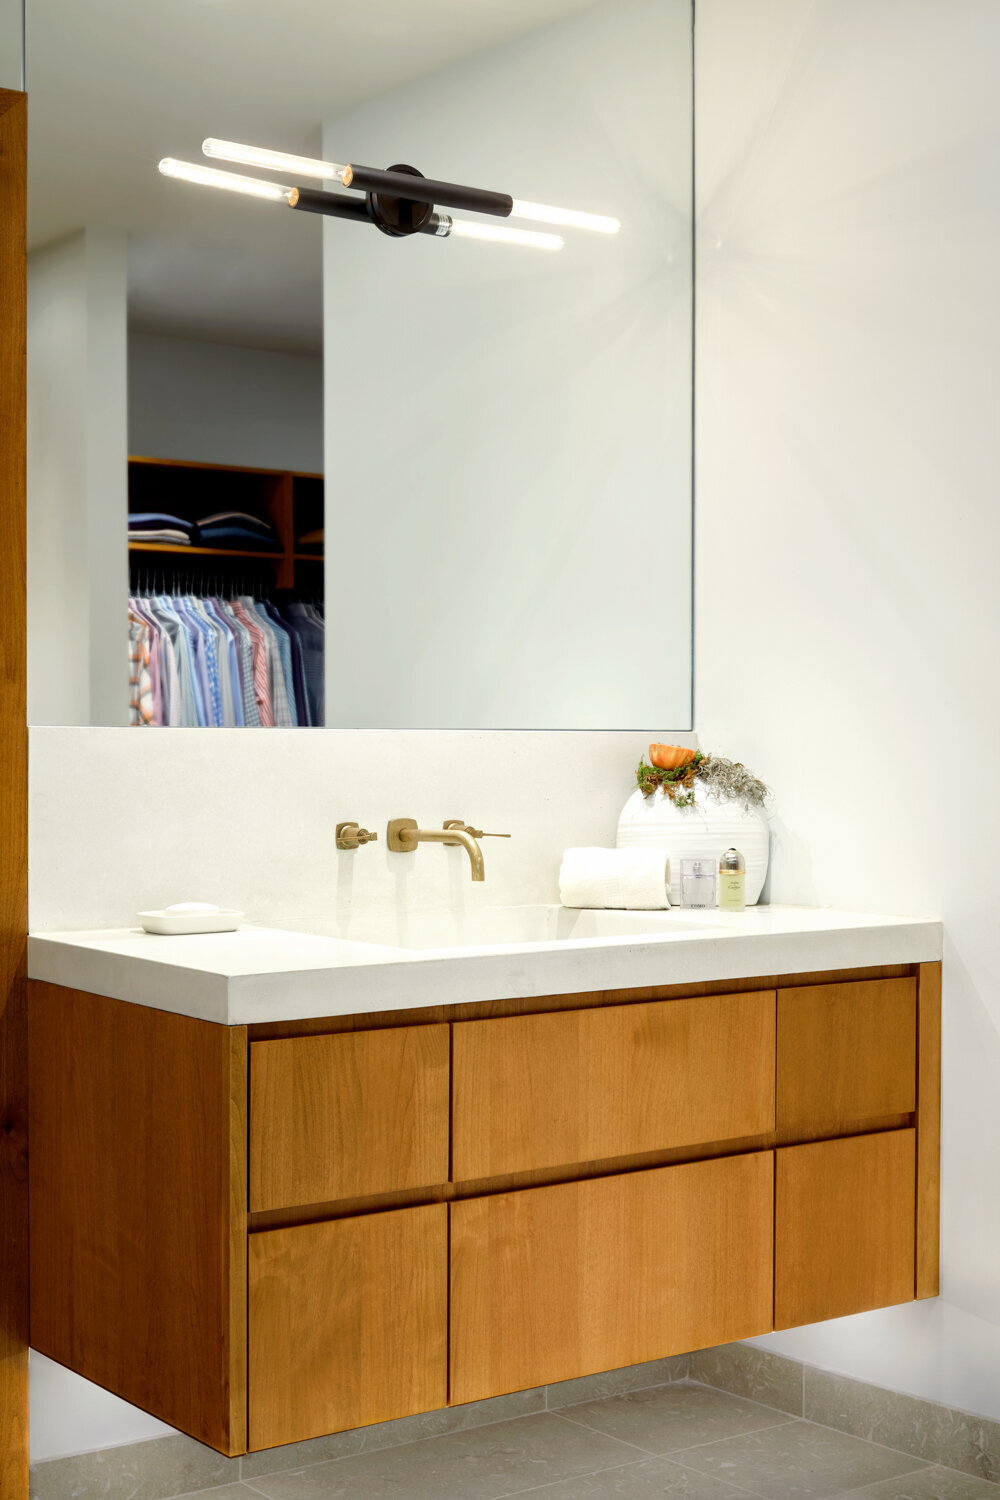 Panageries Residential Interior Design | Pacific NW Modern Dwelling Vanity Detail with modern lighting and floating cabinets